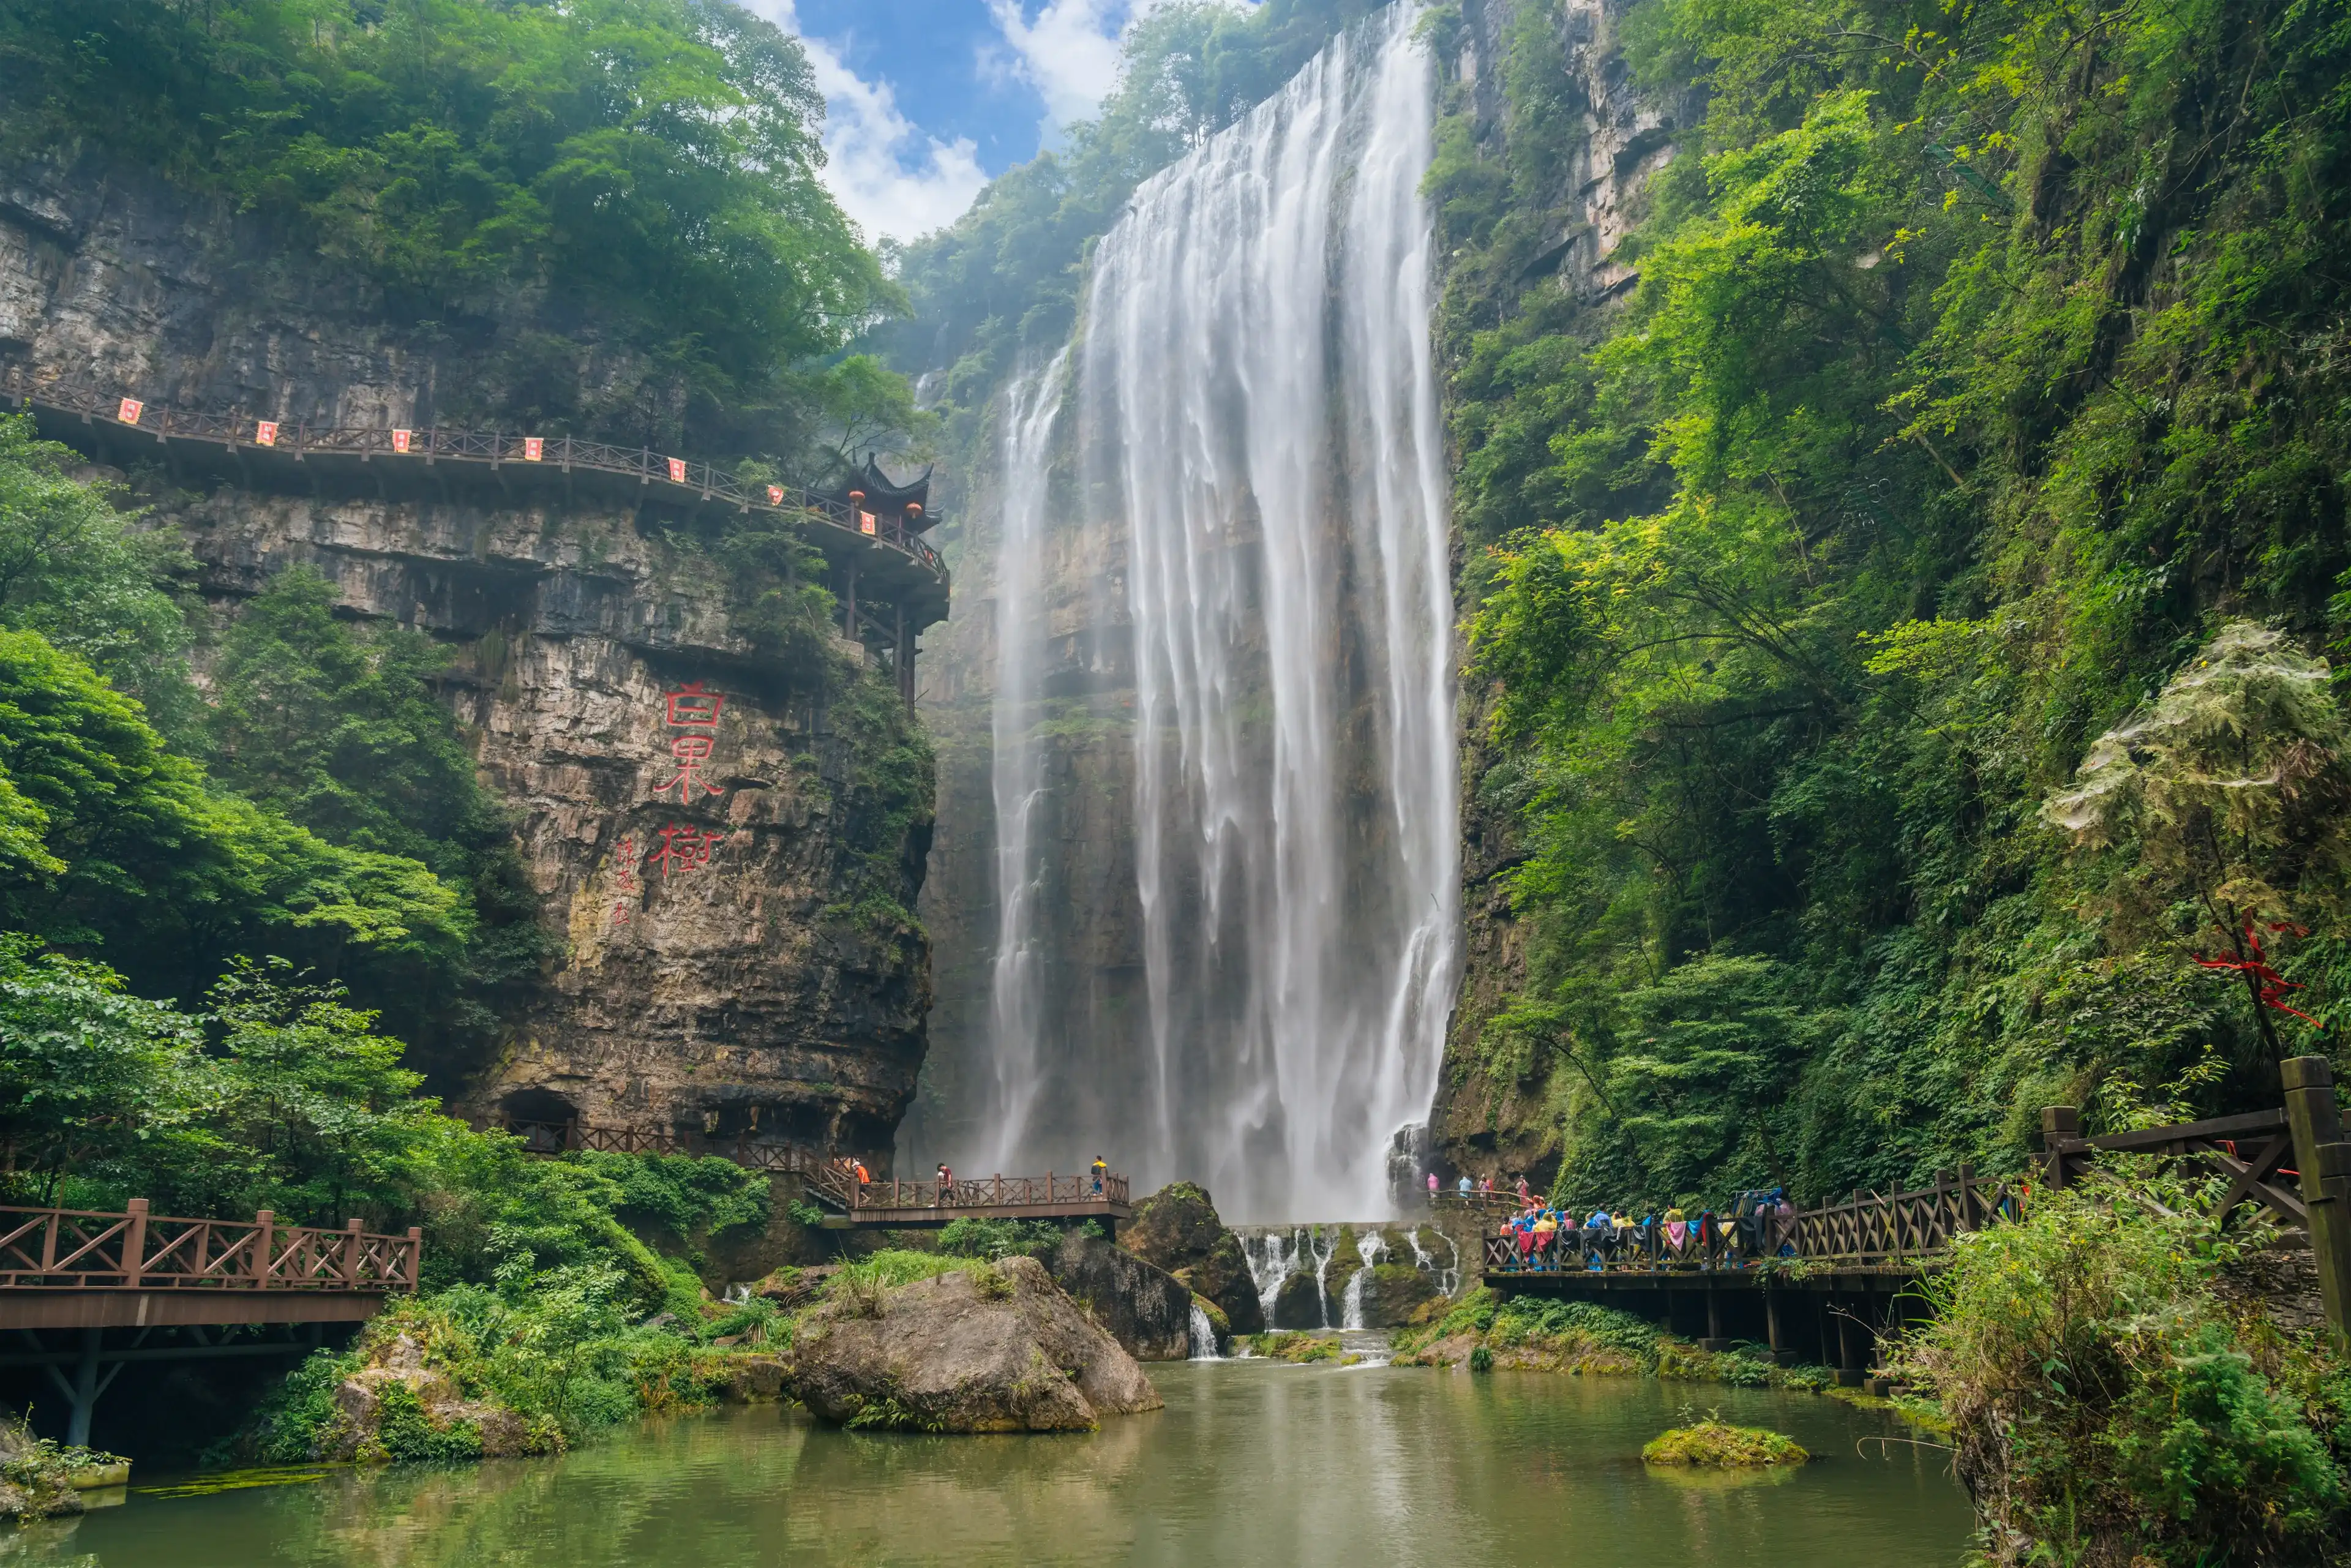 Yichang City,Hubei Province ,China.The Three Gorges waterfall is a national geopark integrating Canyon, karst cave, landscape and fossil culture..The rock is engraved with "Bai Guo Shu".